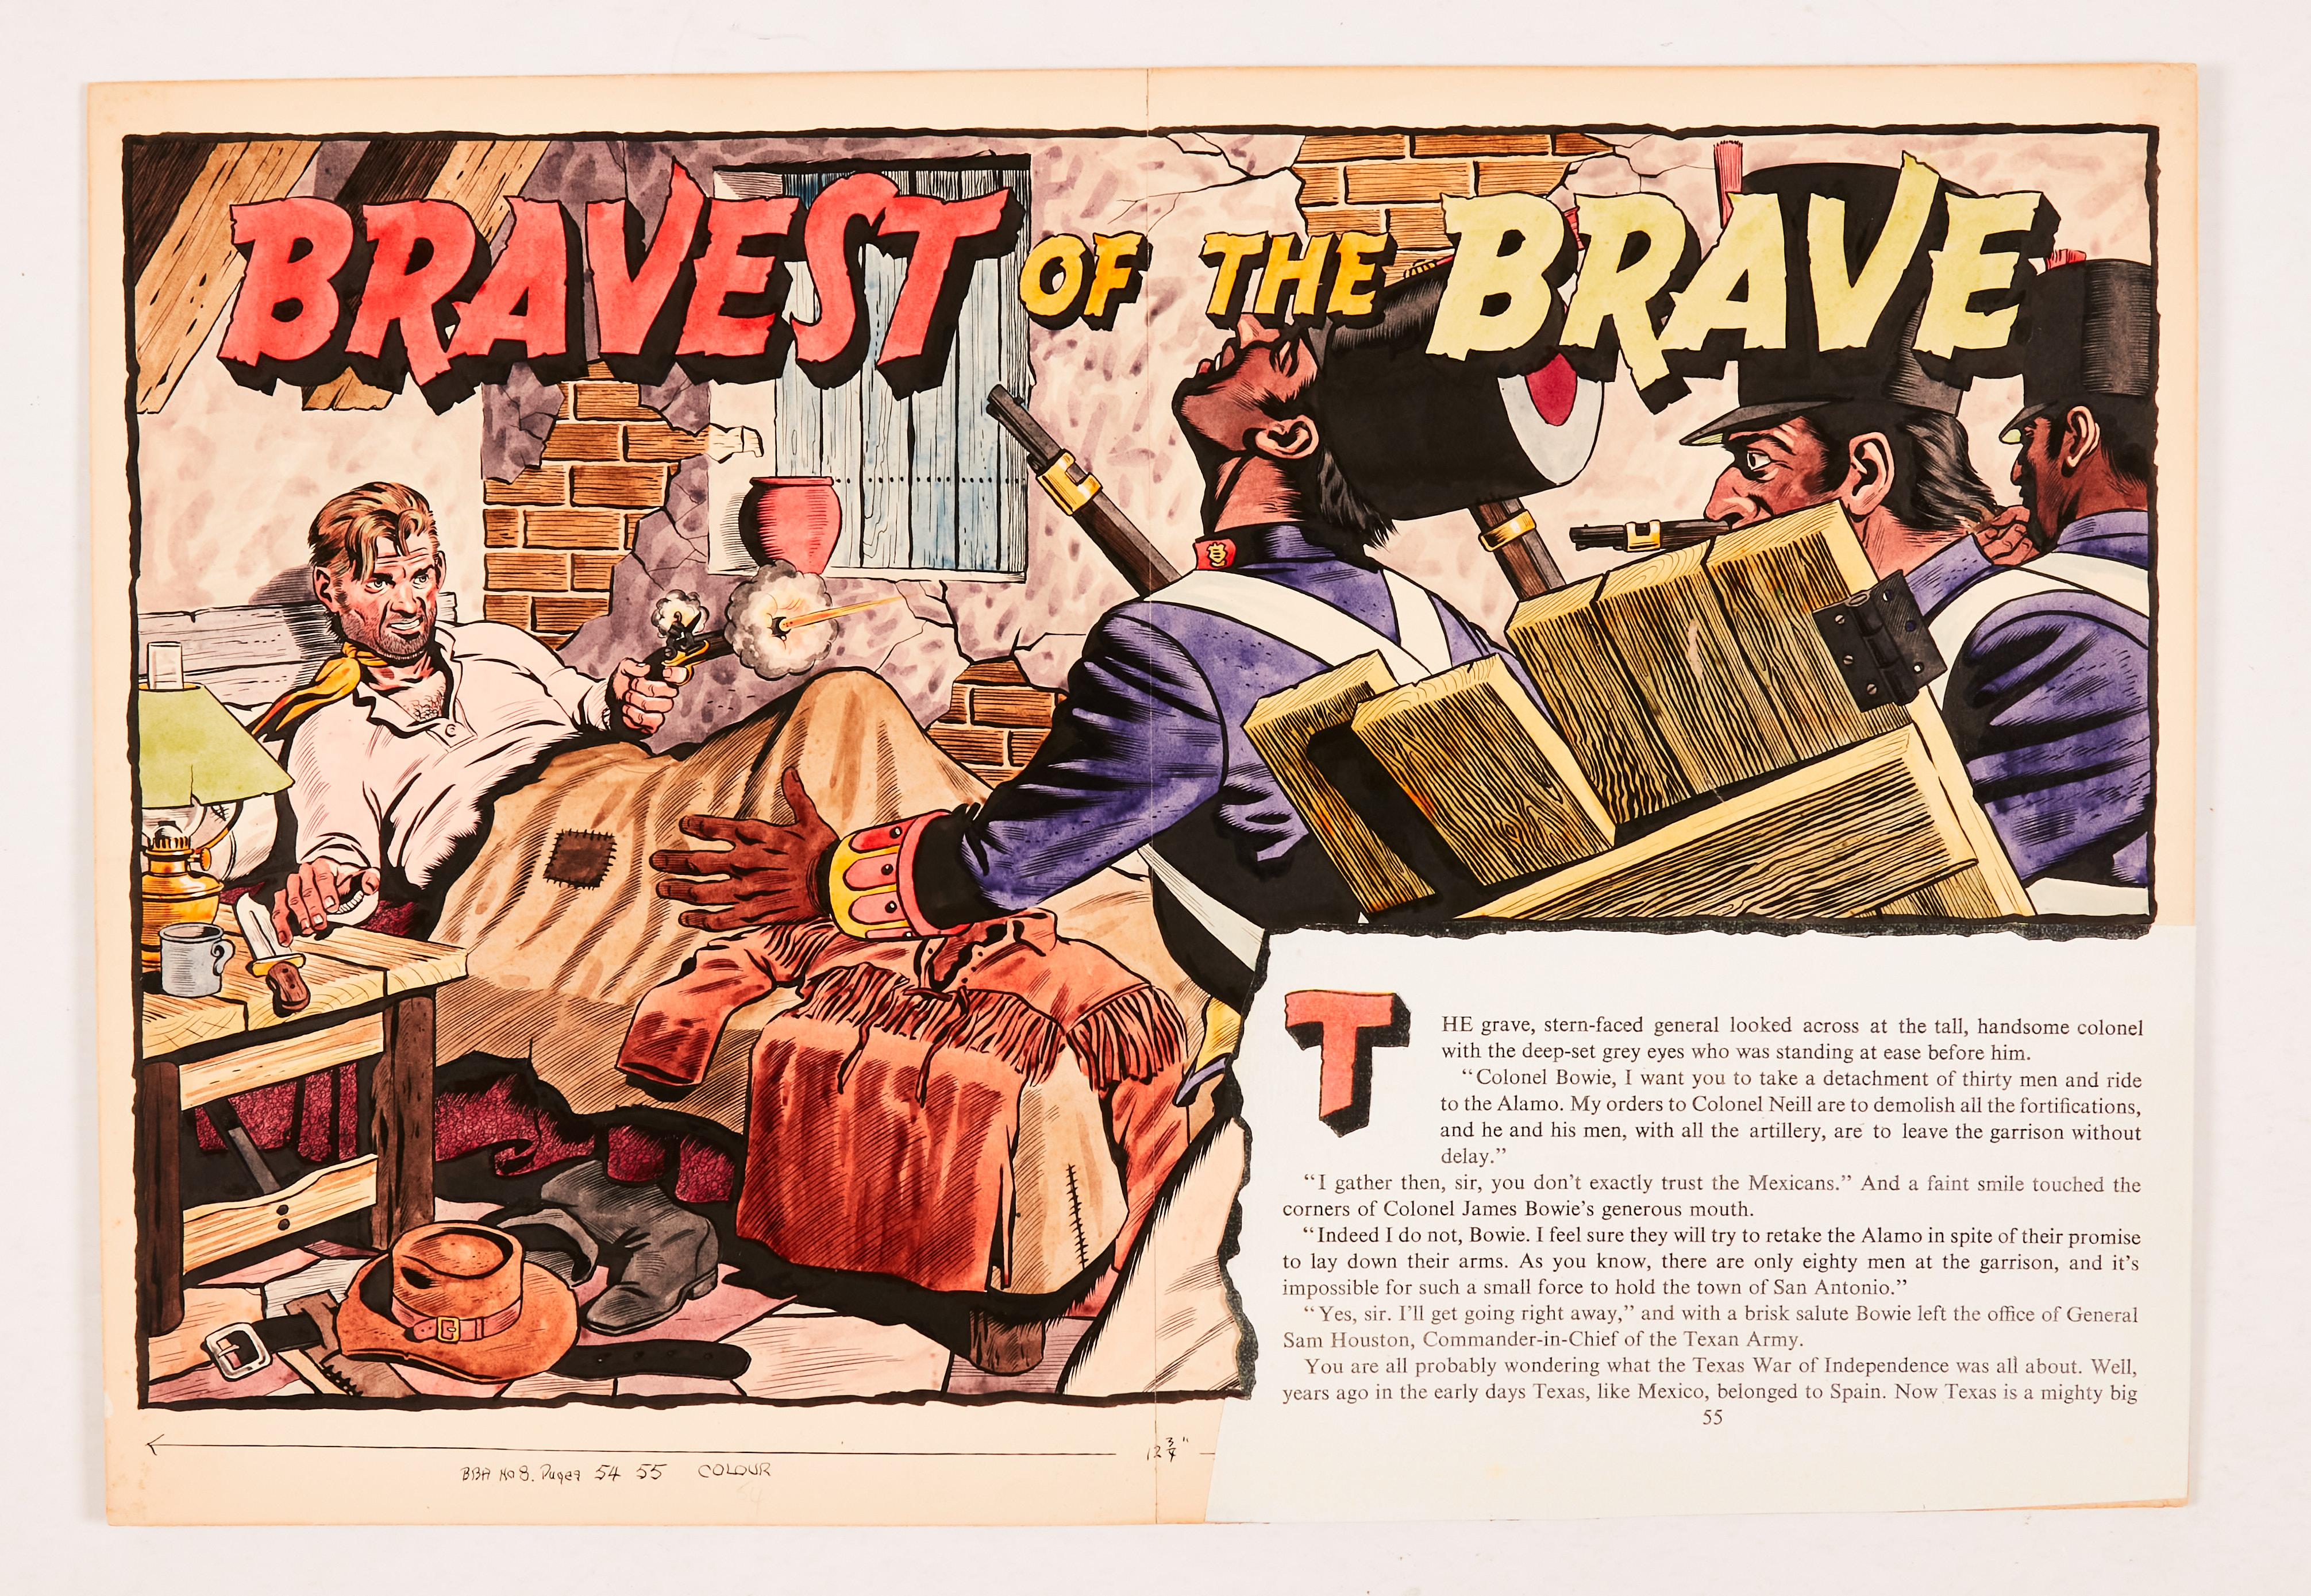 Bravest of the Brave original double-page artwork (1956) drawn and painted by Denis McLoughlin. From